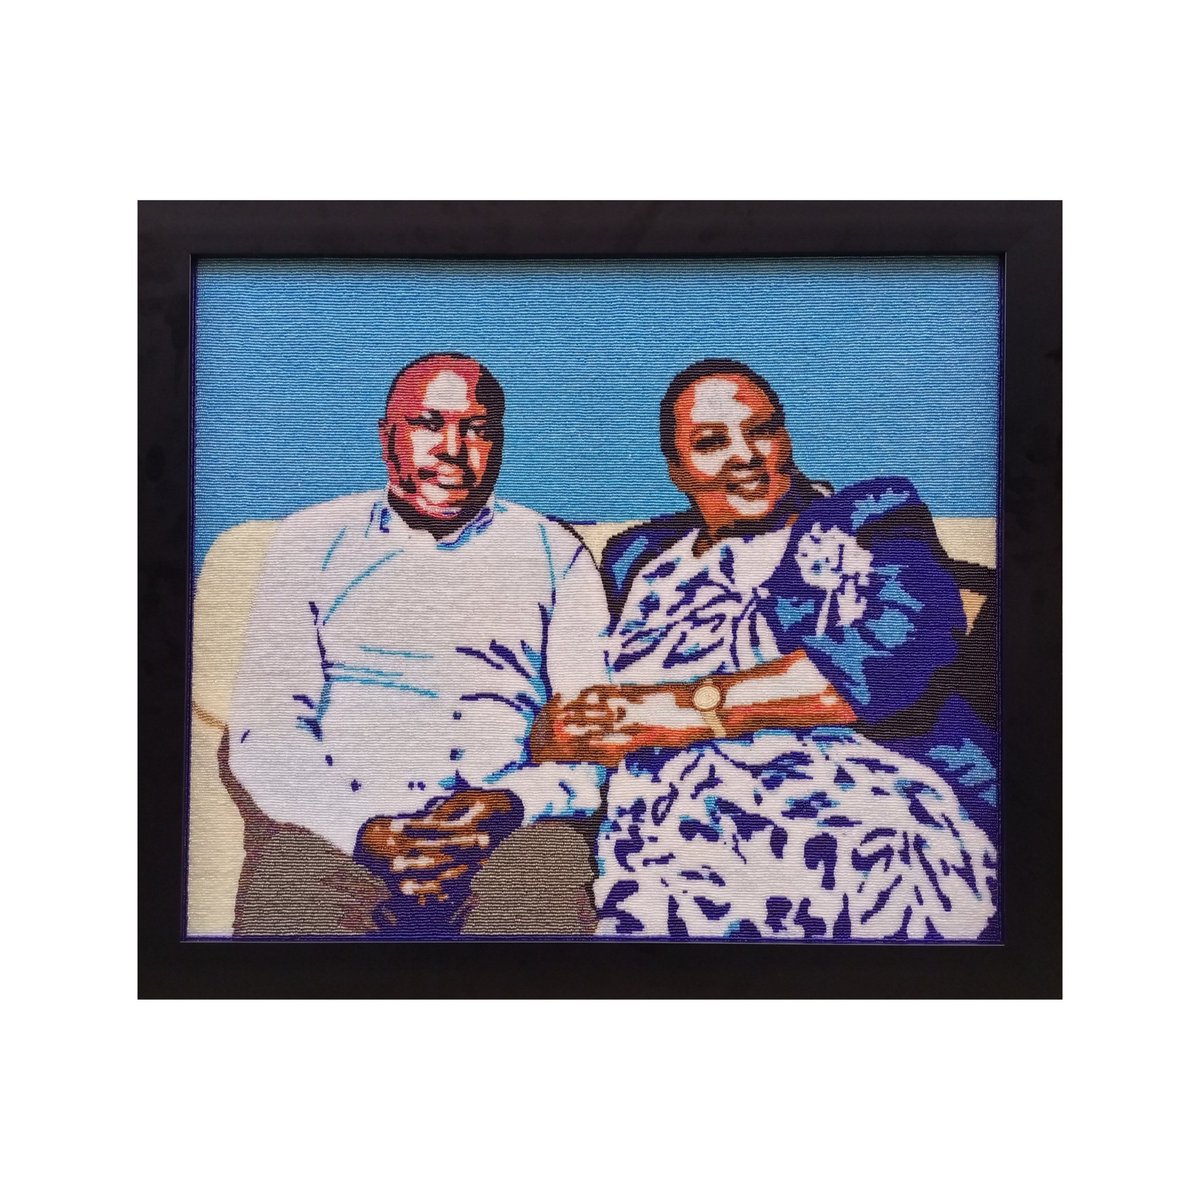 Beaded Portrait Place your orders for your lovely ones make sure the order is at least 2-3weeks before. #bead #beadwork #art #supportsmallbusiness #RwOt